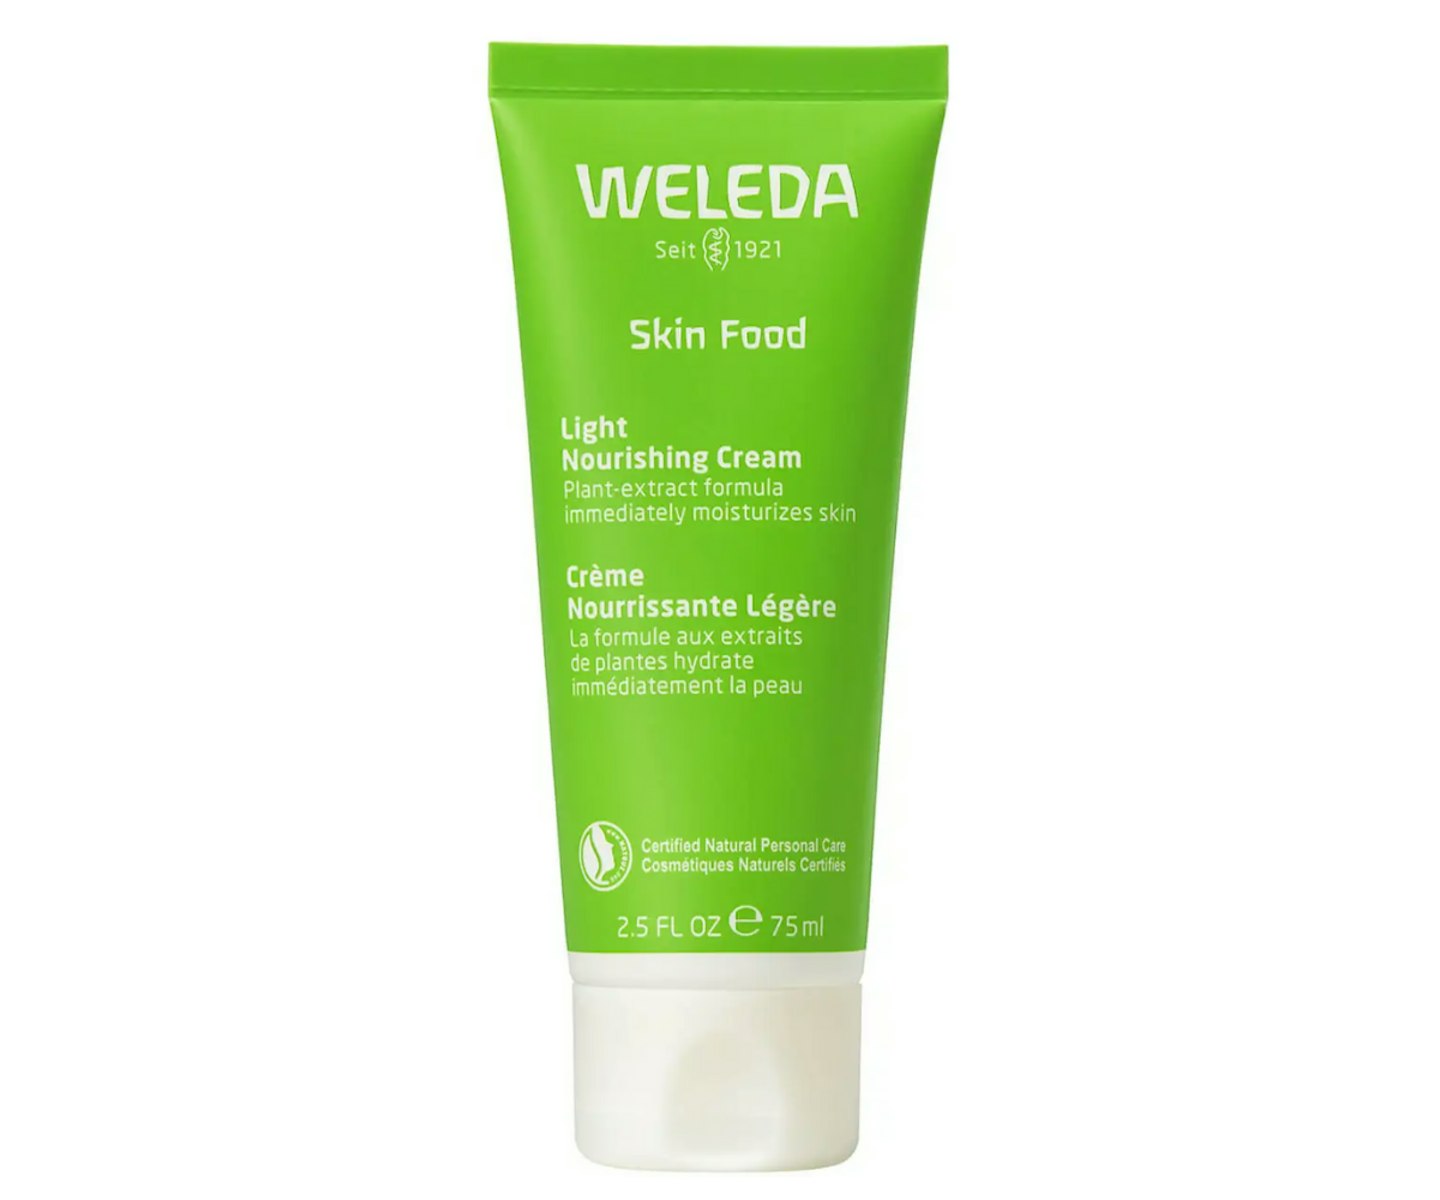 A picture of the Weleda Skin Food Light